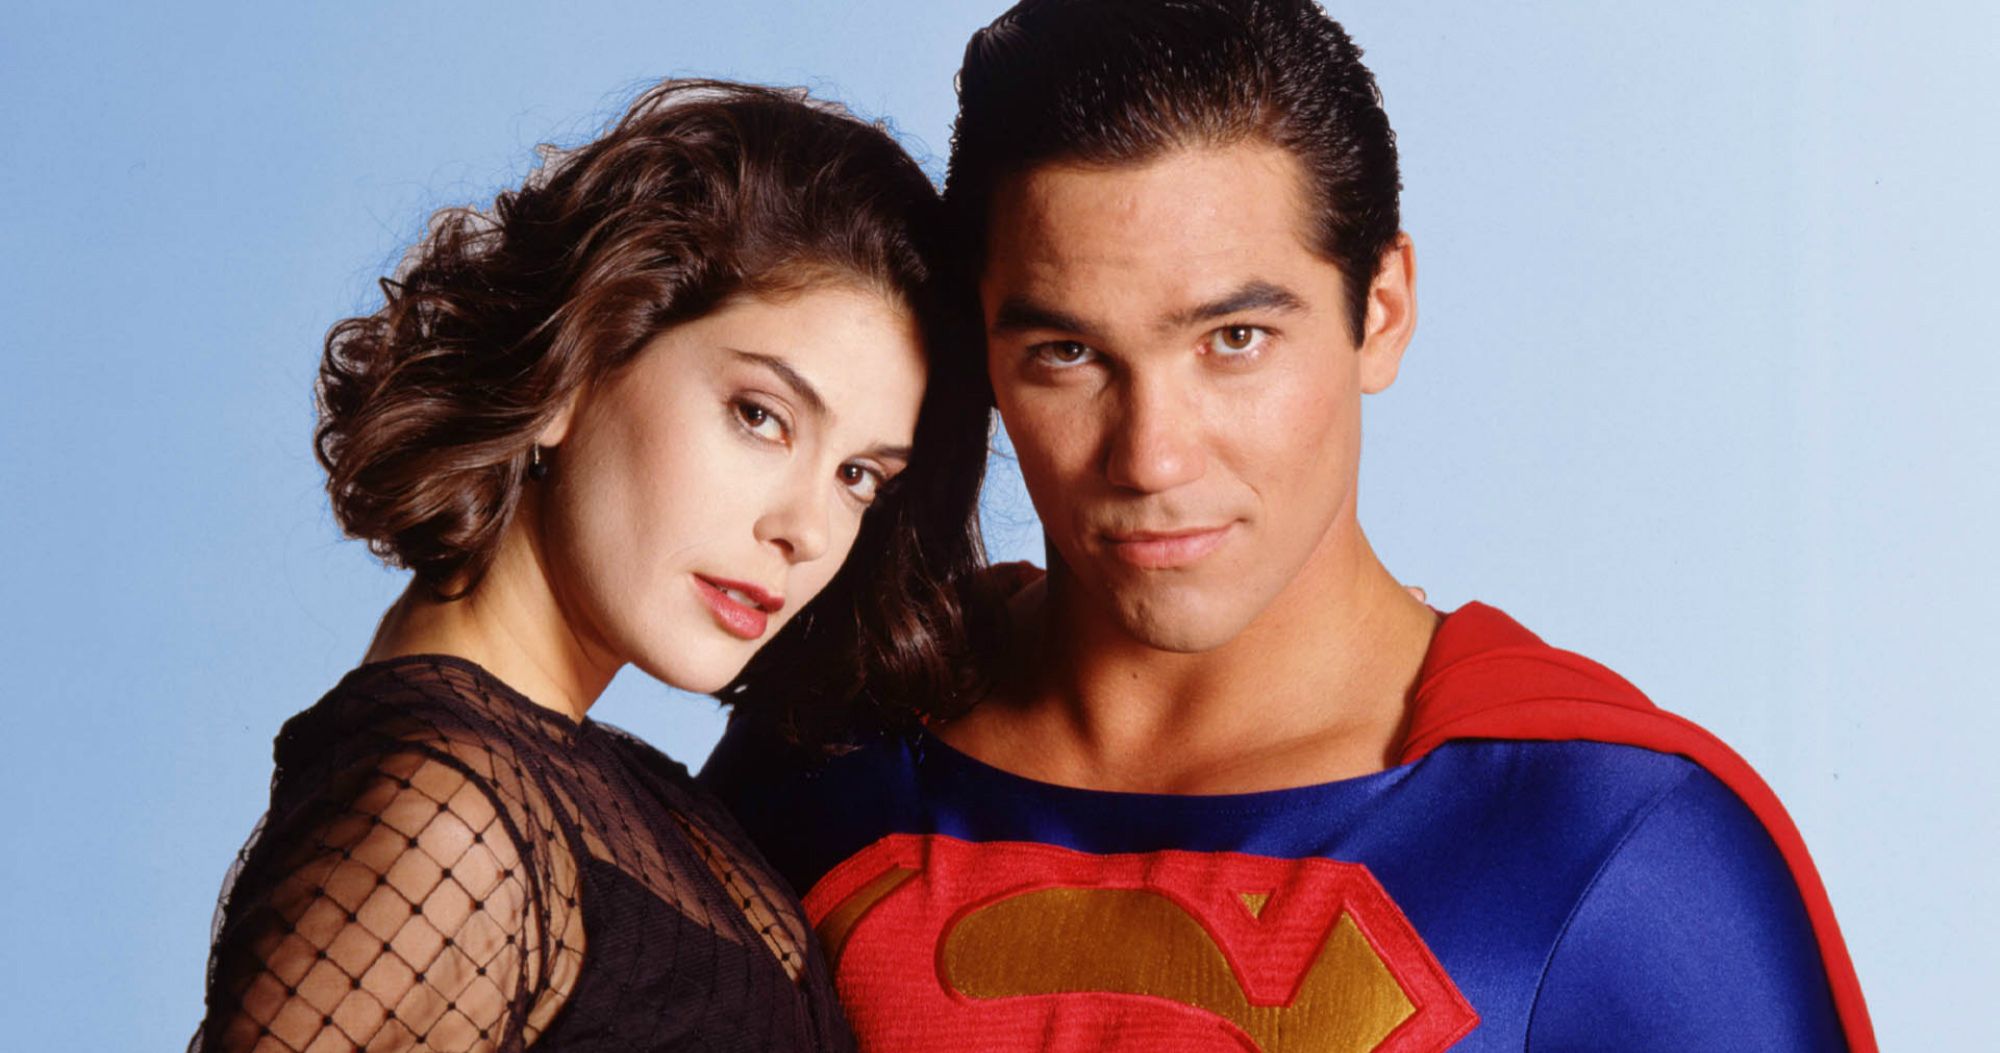 Lois &amp; Clark Star Dean Cain Sounds Off on Superman Coming Out in DC Comic Book